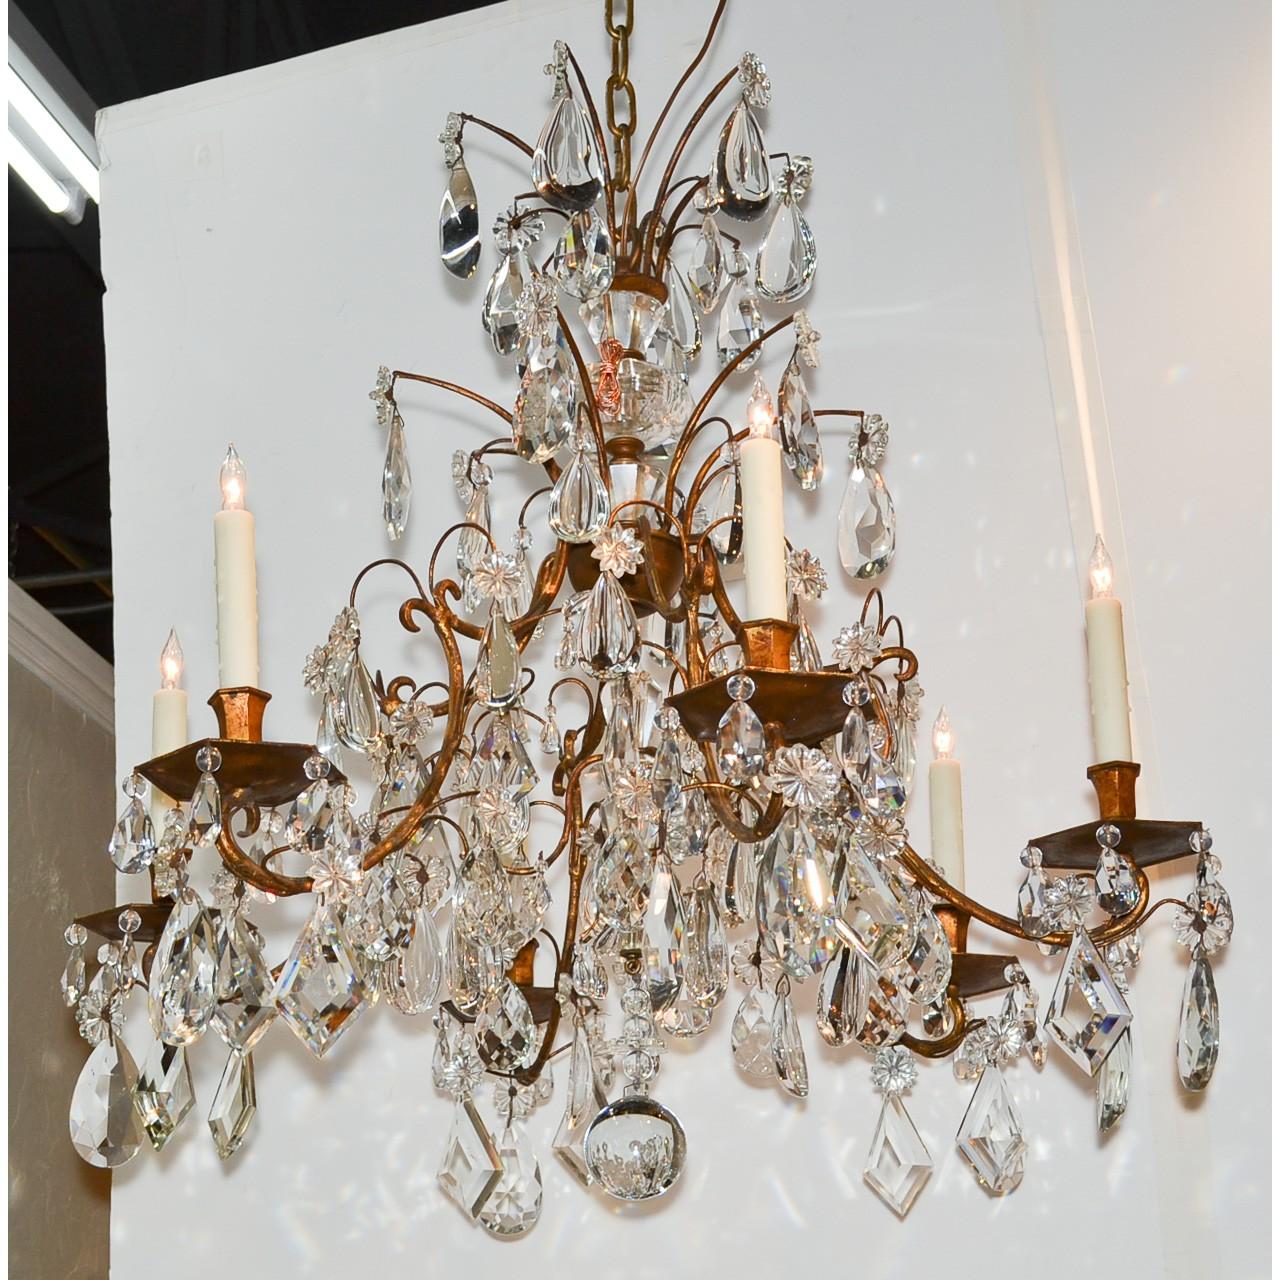 Mid-20th Century French Bronze & Crystal Chandelier, after Maison Baguès